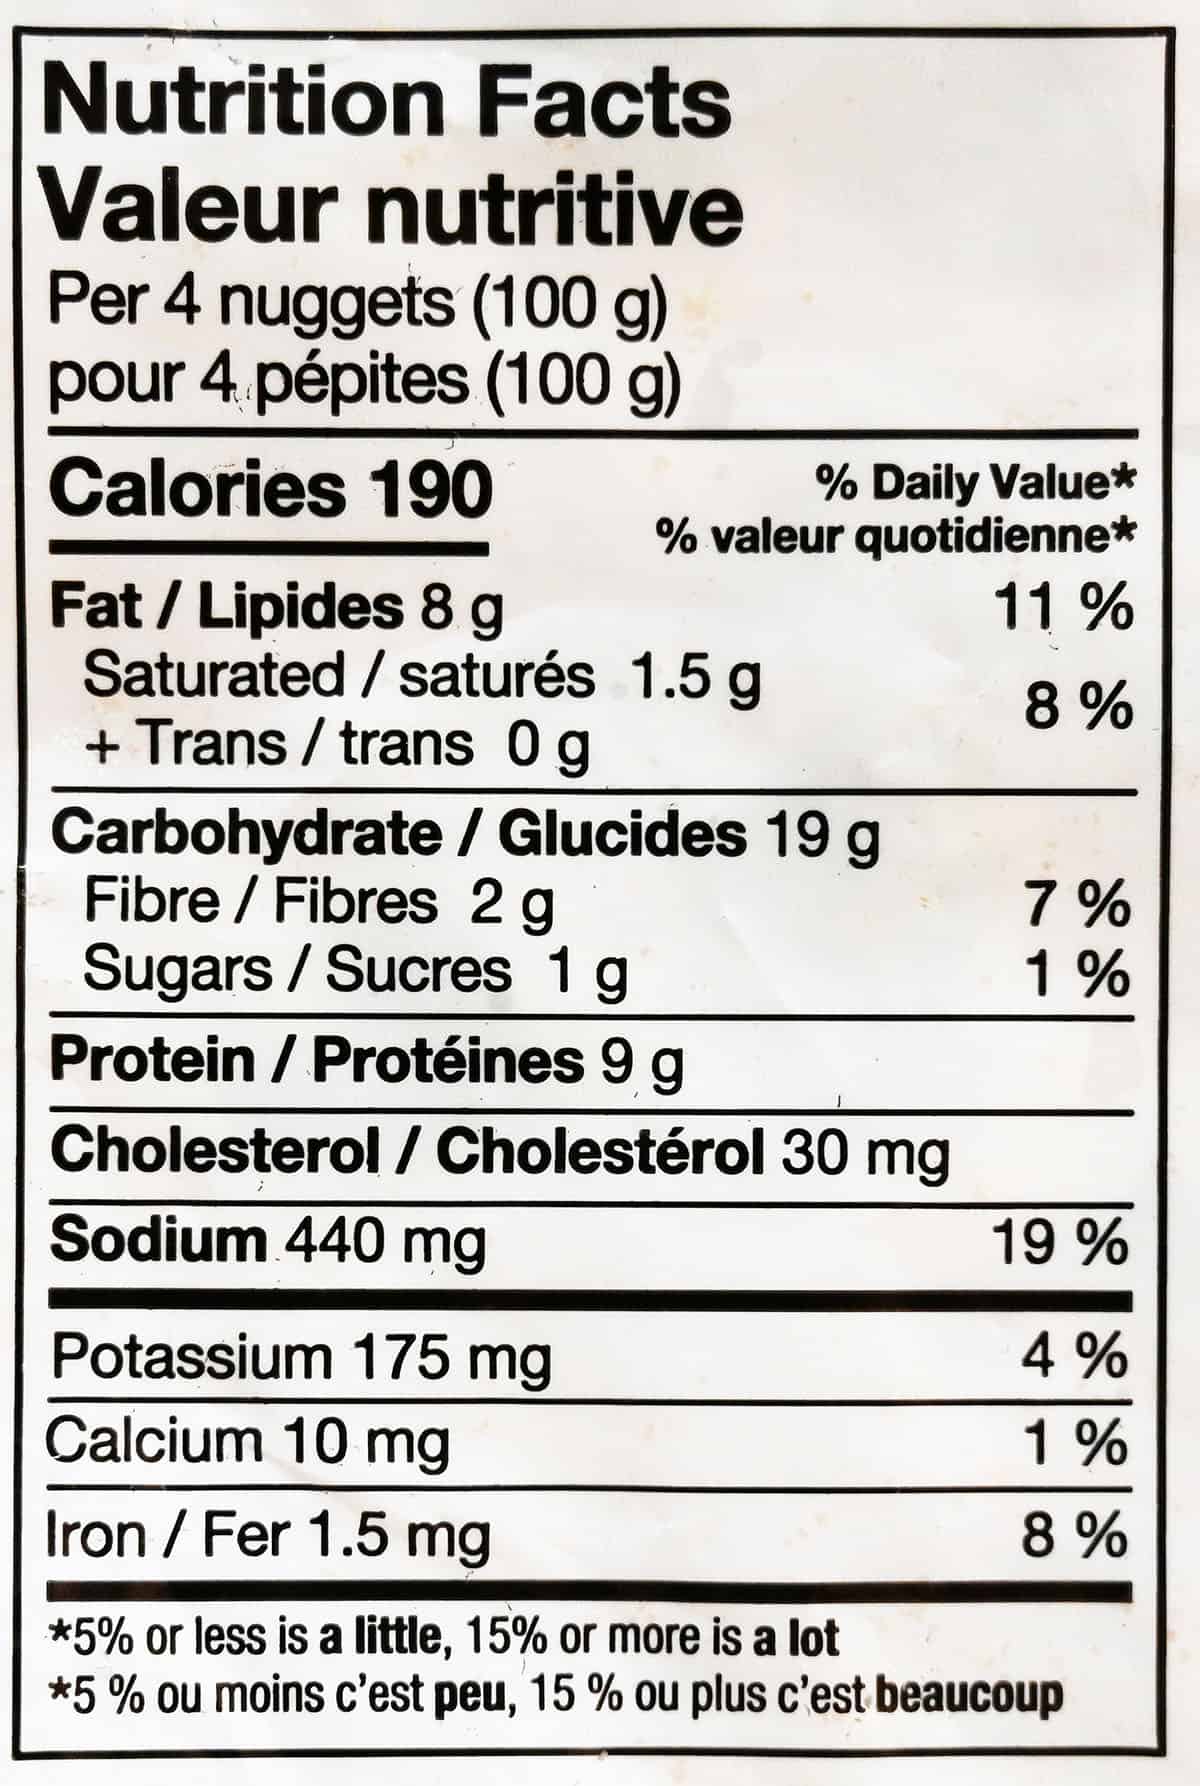 Nutrition facts from the bag.